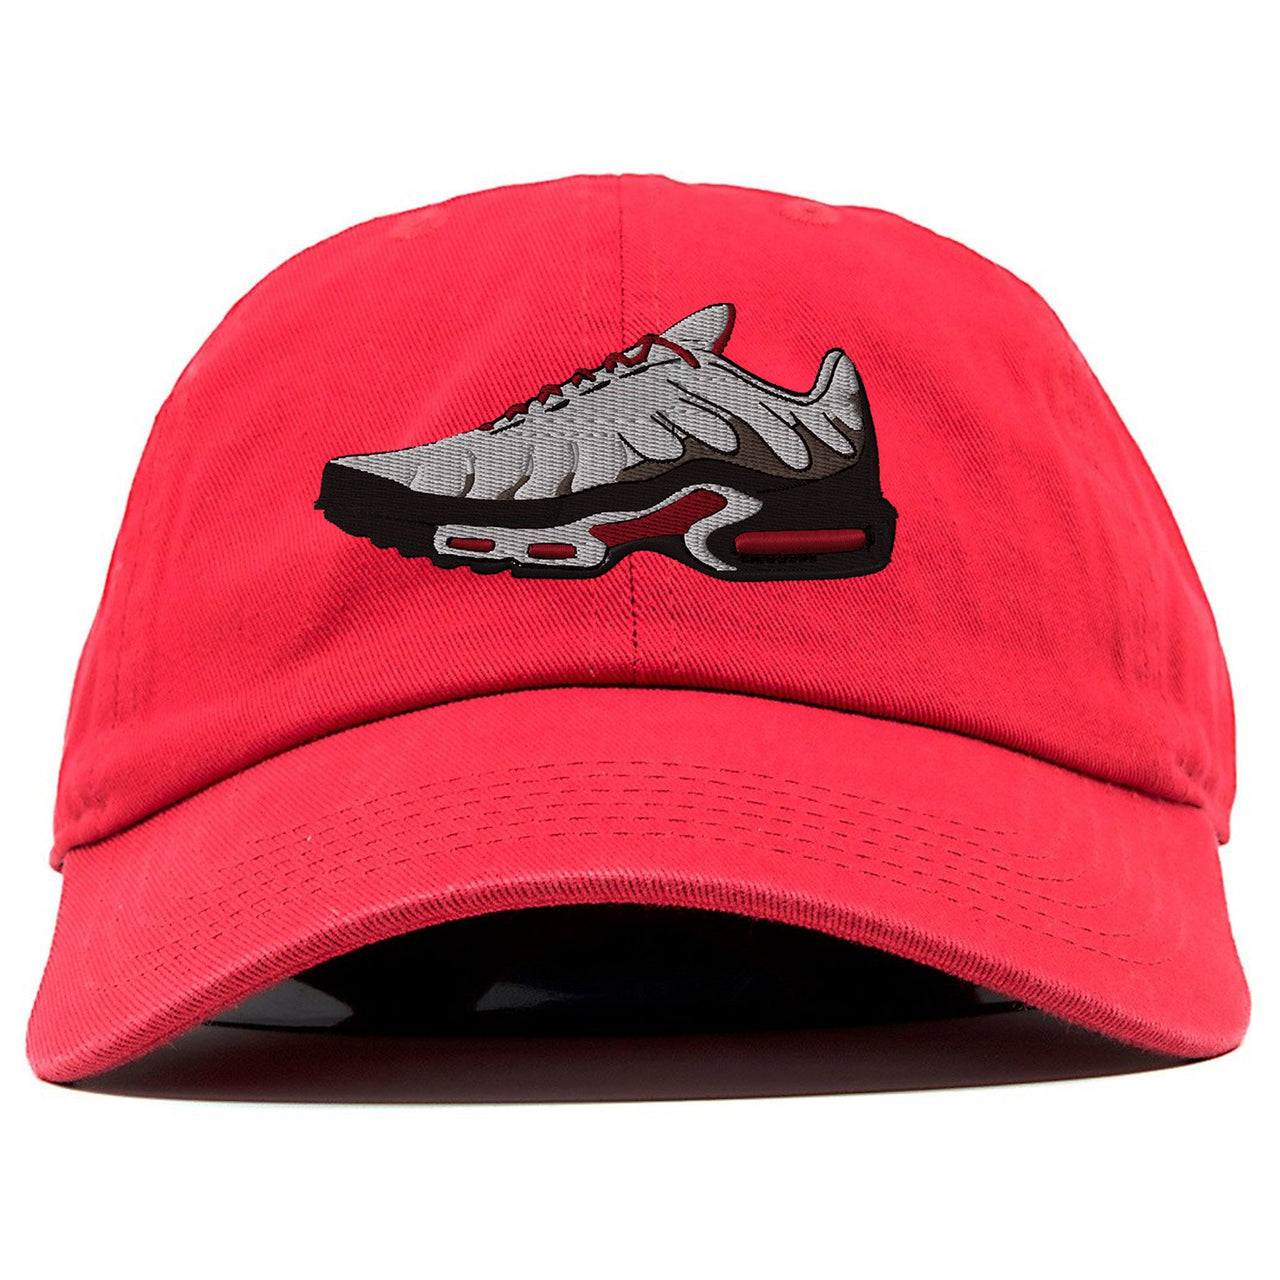 White University Red Pluses Dad Hat | Shoe, Red